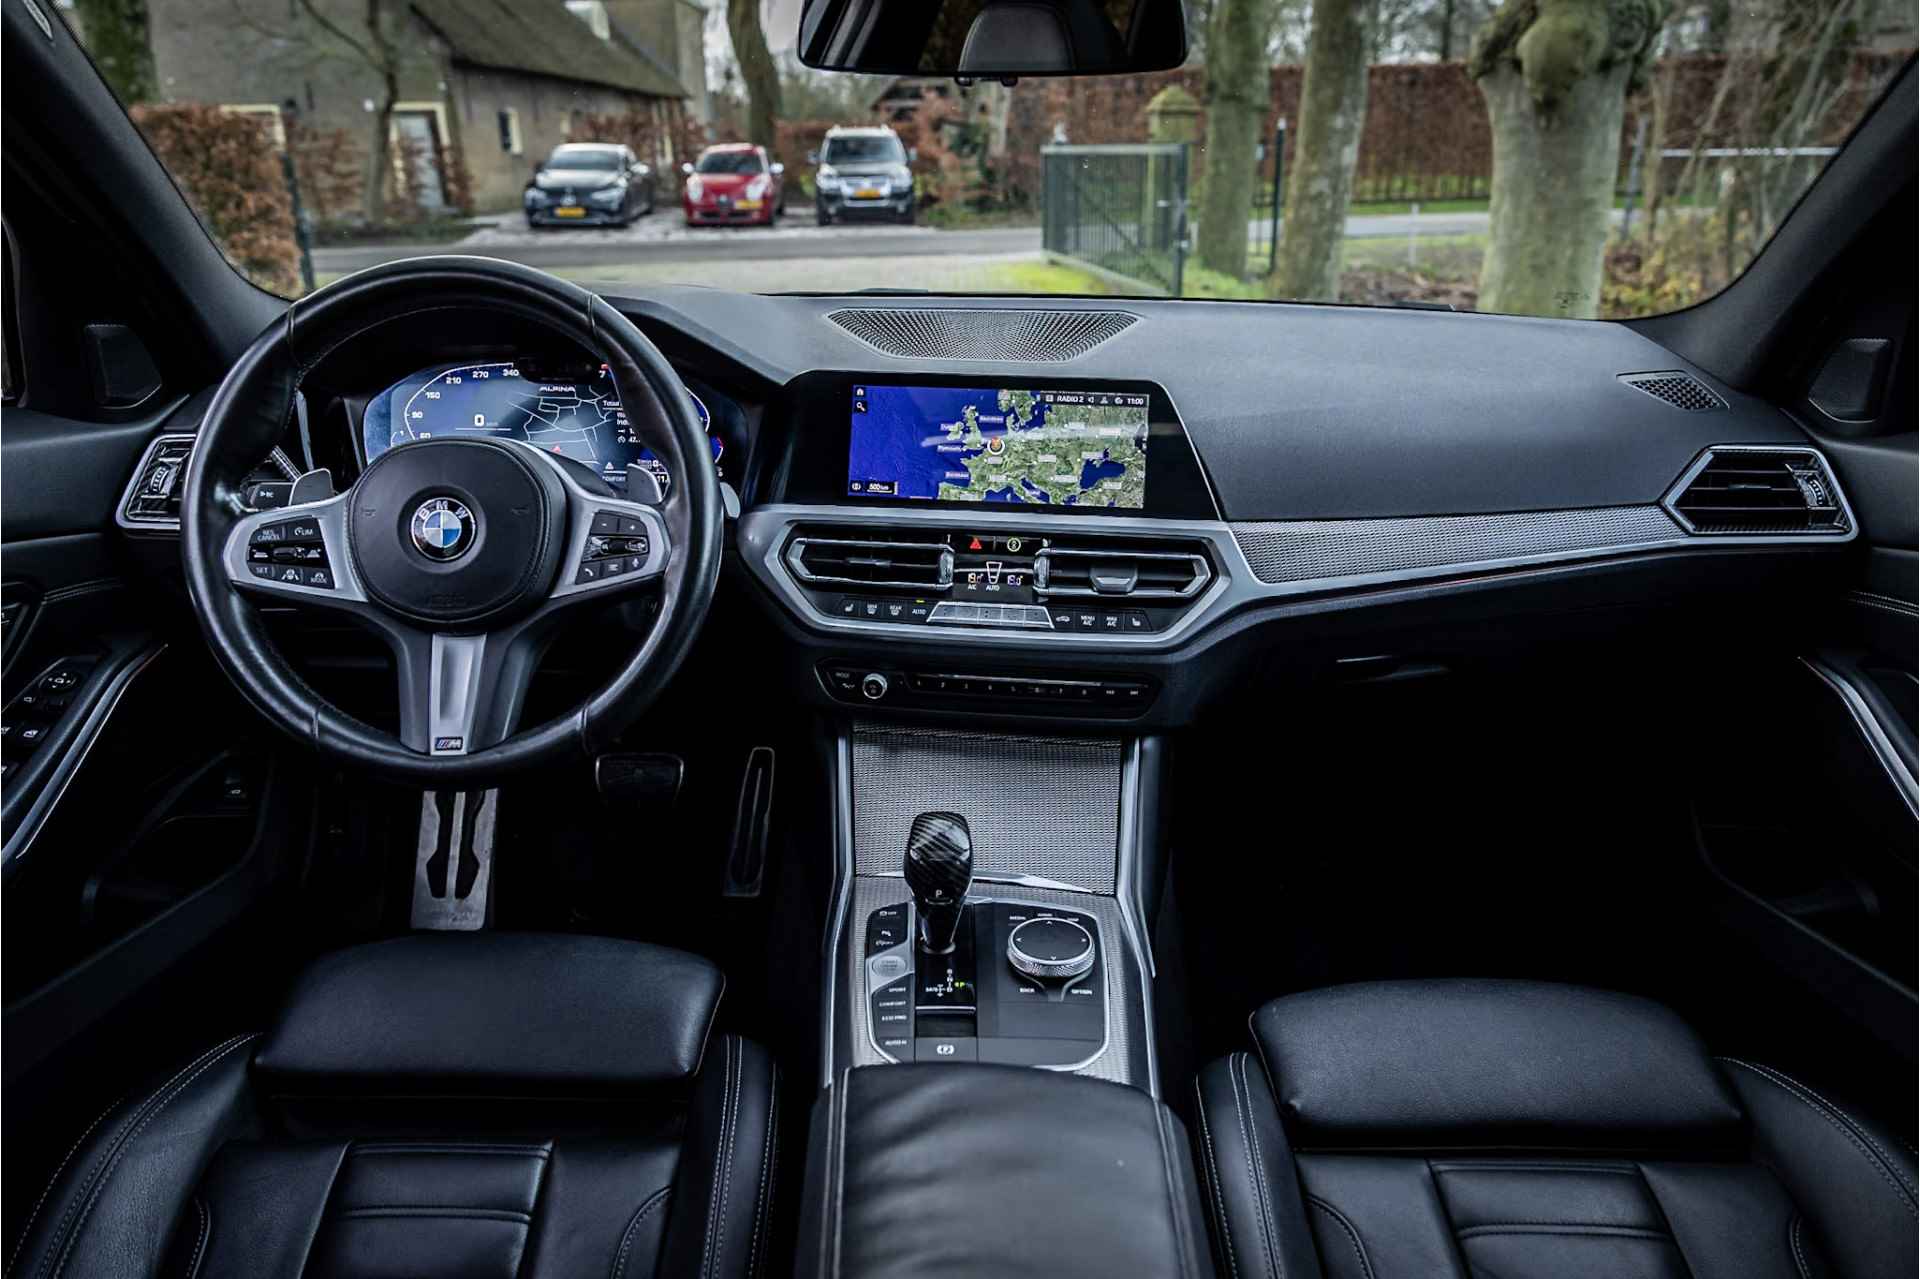 BMW 3 Serie Touring 330i High Executive M-Sport 20" Laser ACC Panorama HUD - 8/28